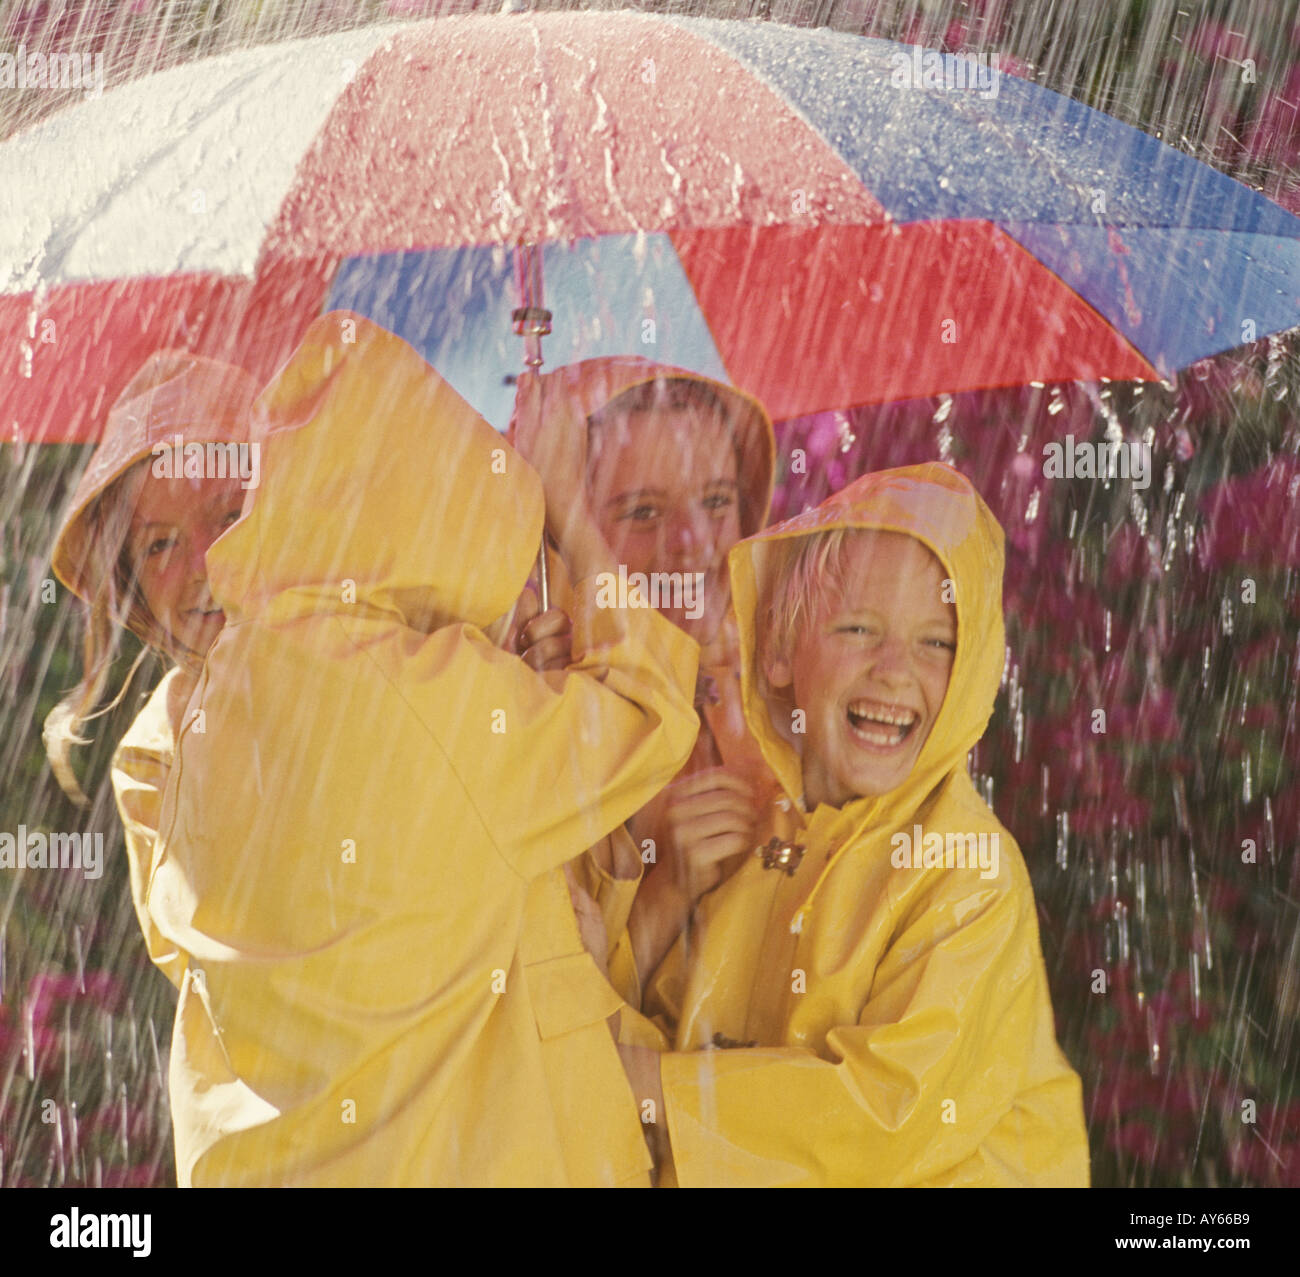 boys and girls playing in rain with umbrella Stock Photo - Alamy